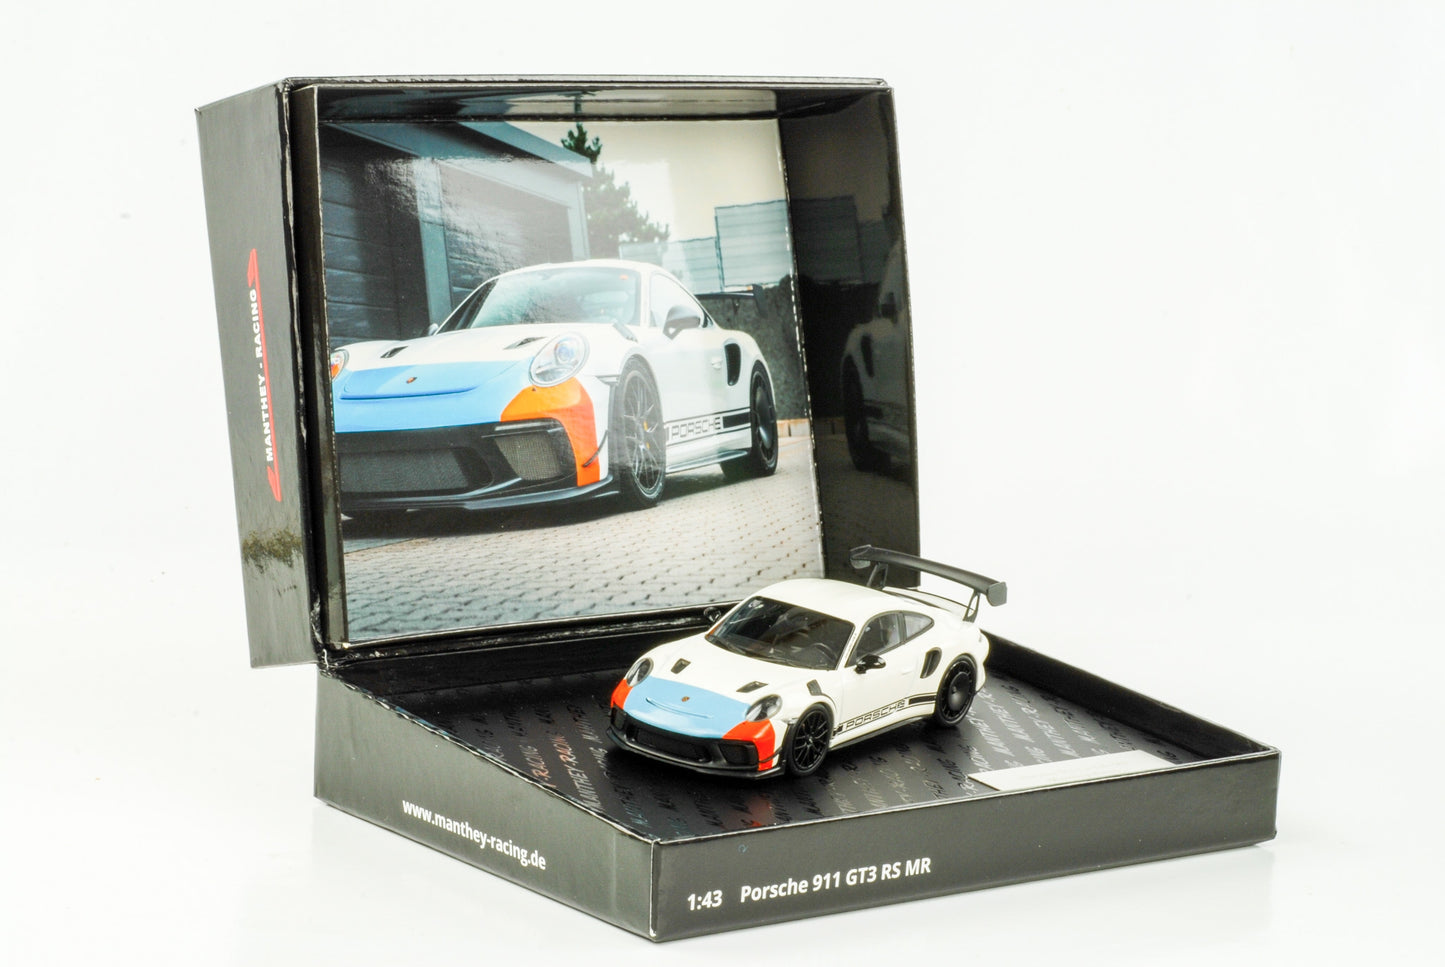 1:43 Manthey 911 991 II GT3 RS MR weiss blau Giftbox Minichamps limited